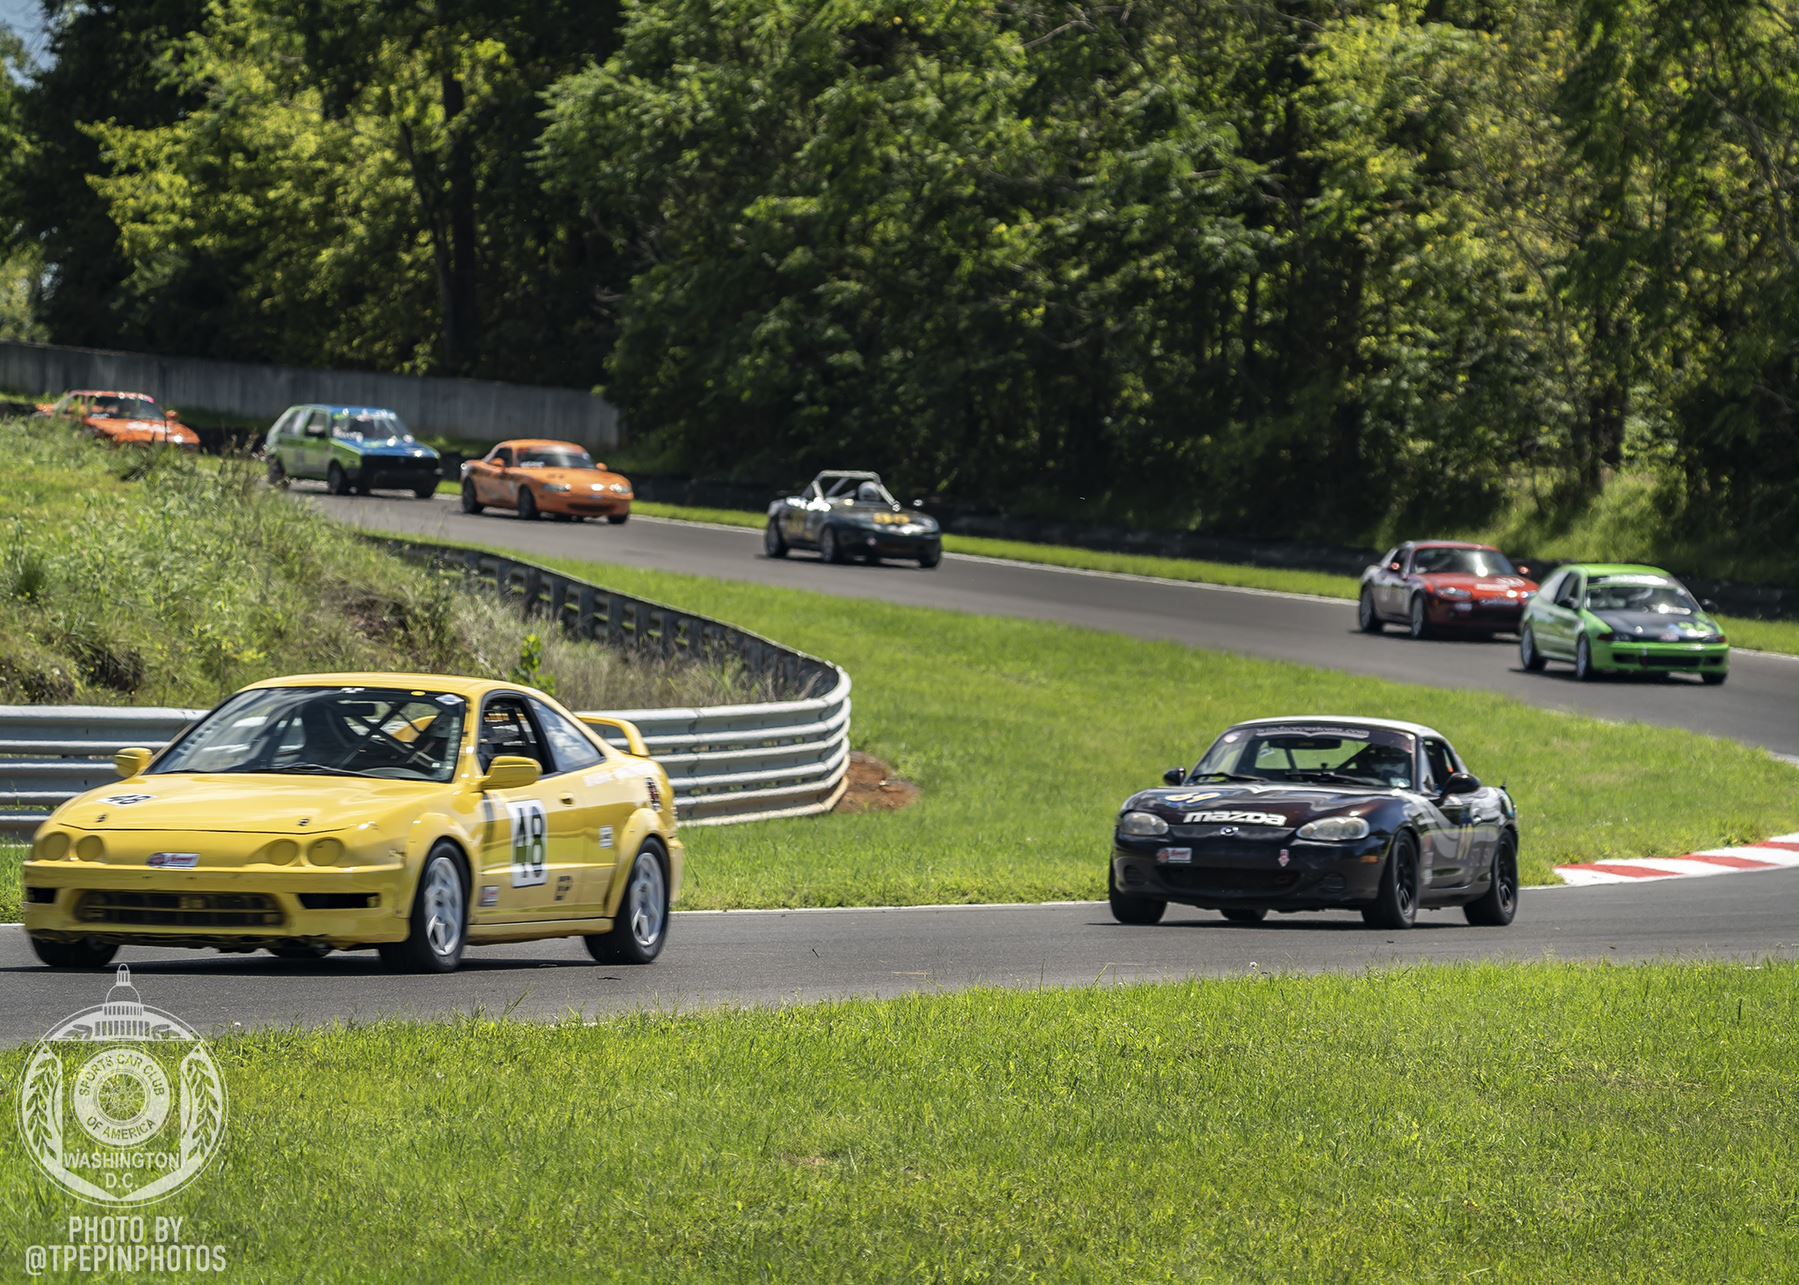 MINI Car Corral hosted by WDCR SCCA at Summit Point Motorsport Park